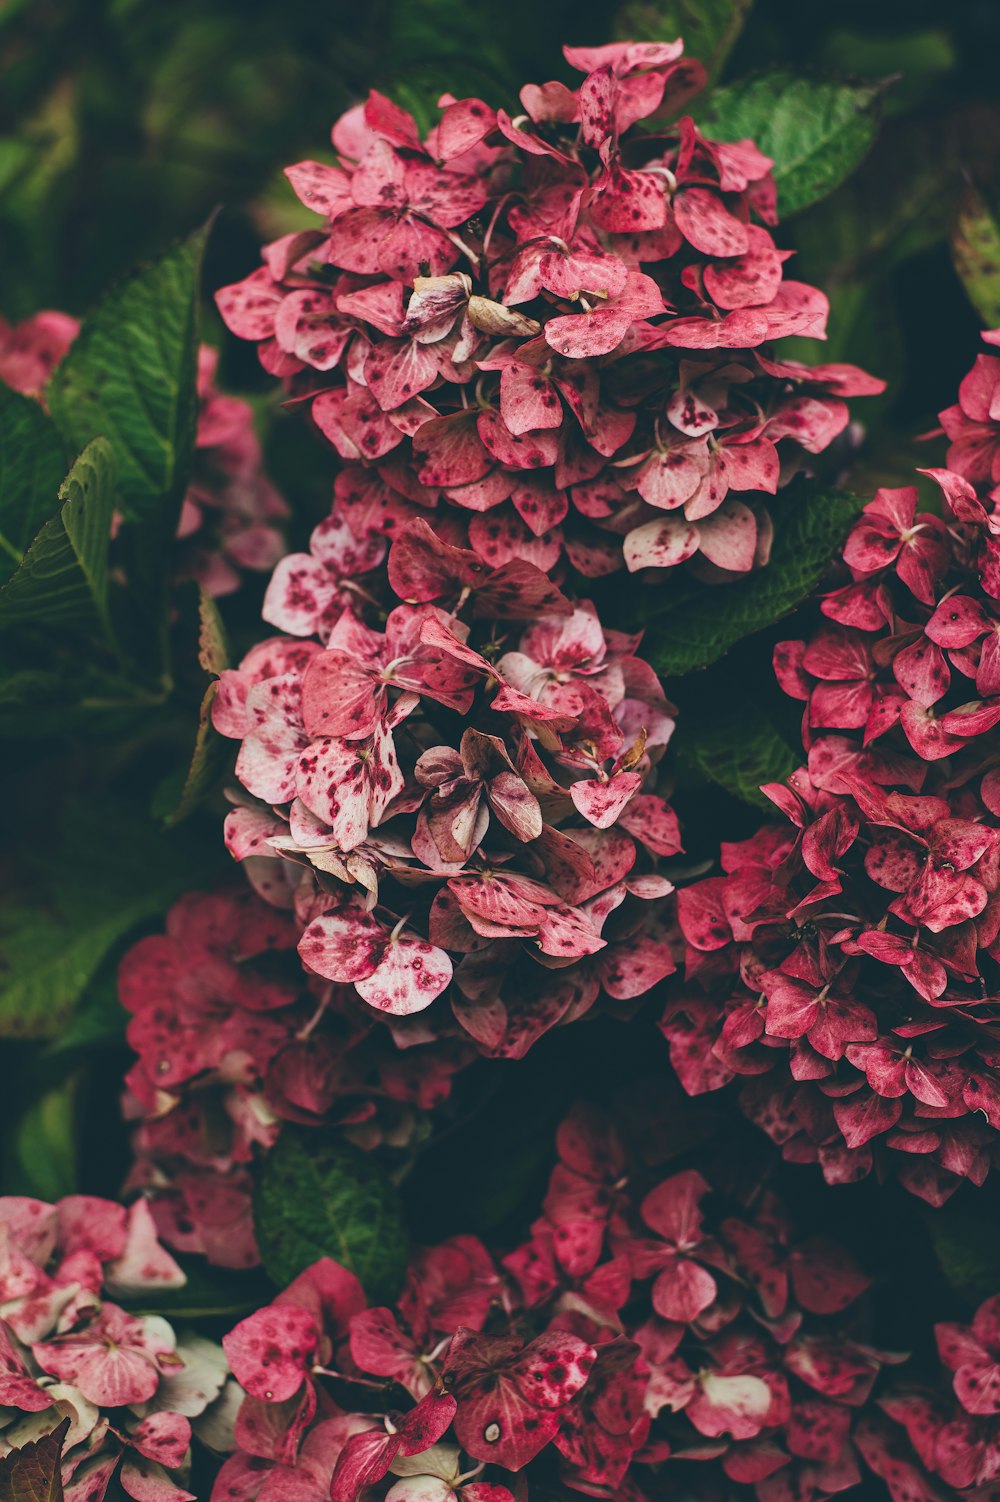 pink hydrangea flowers in close-up photography